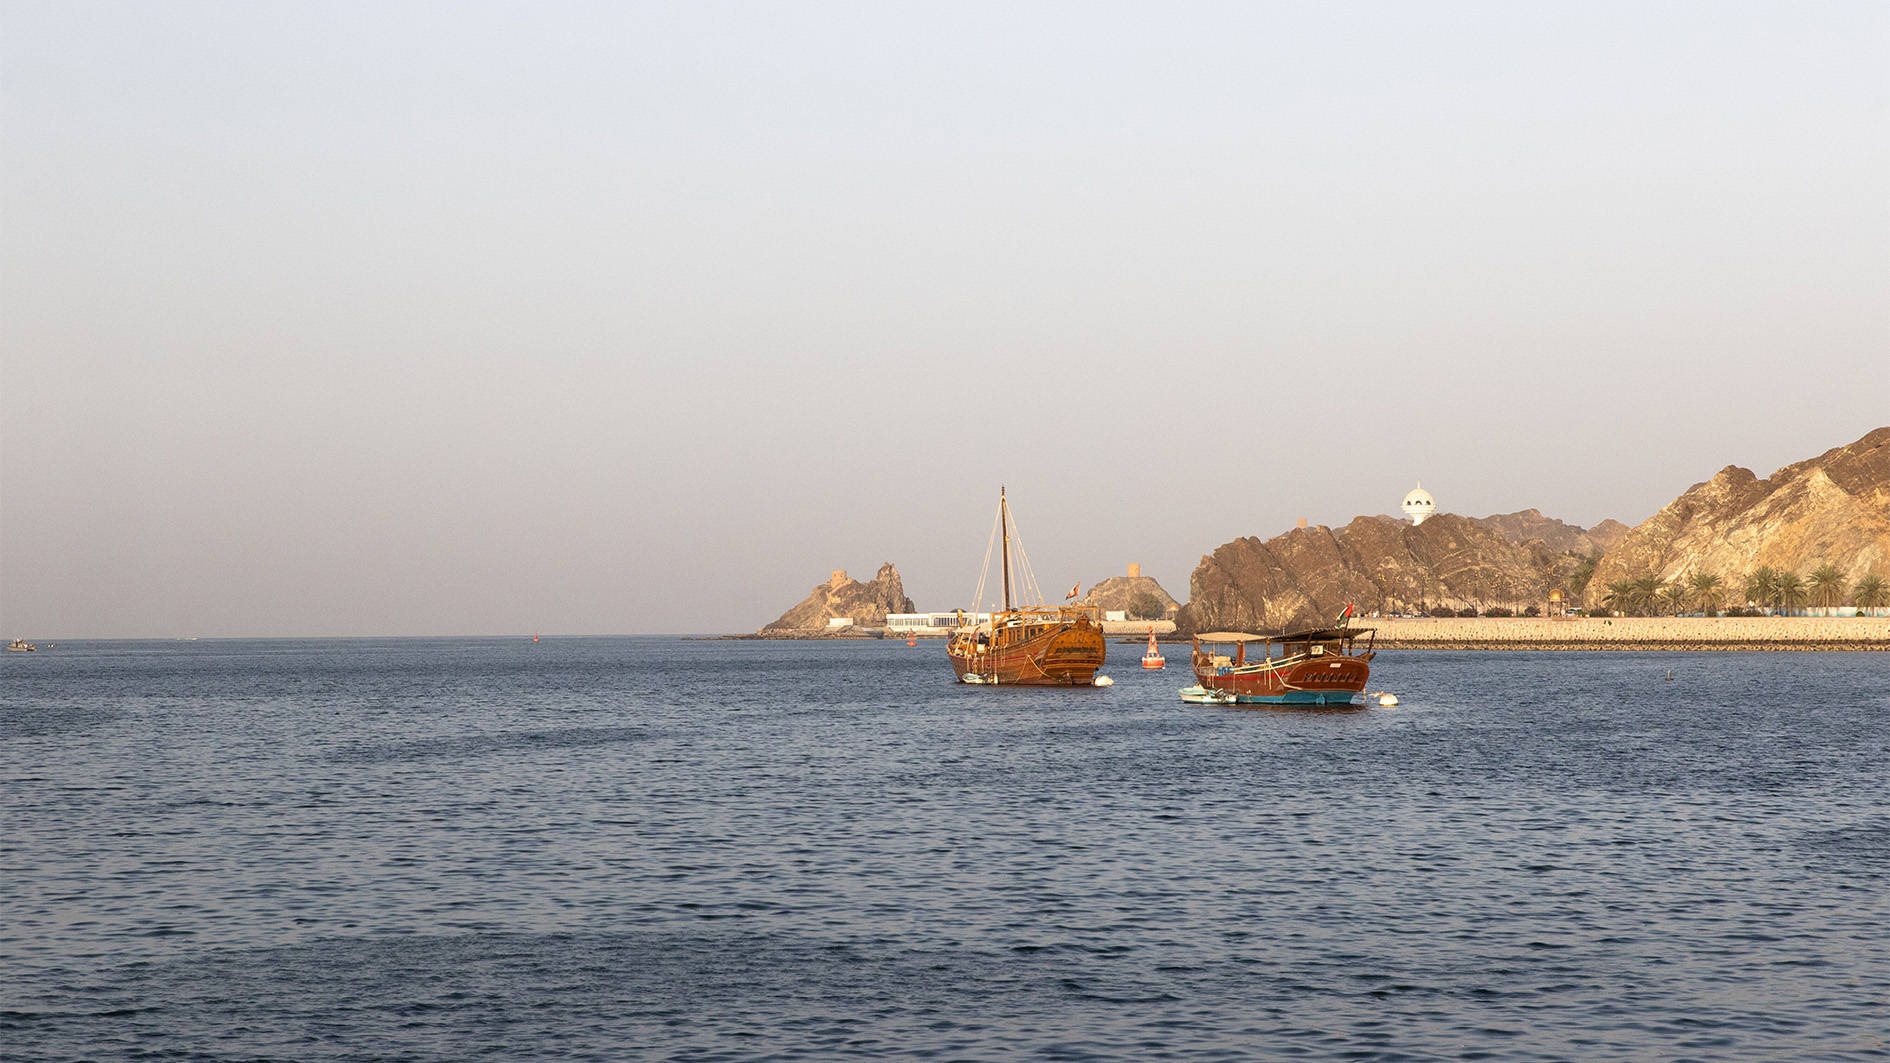 Boats sailing on the Bay of Muscat